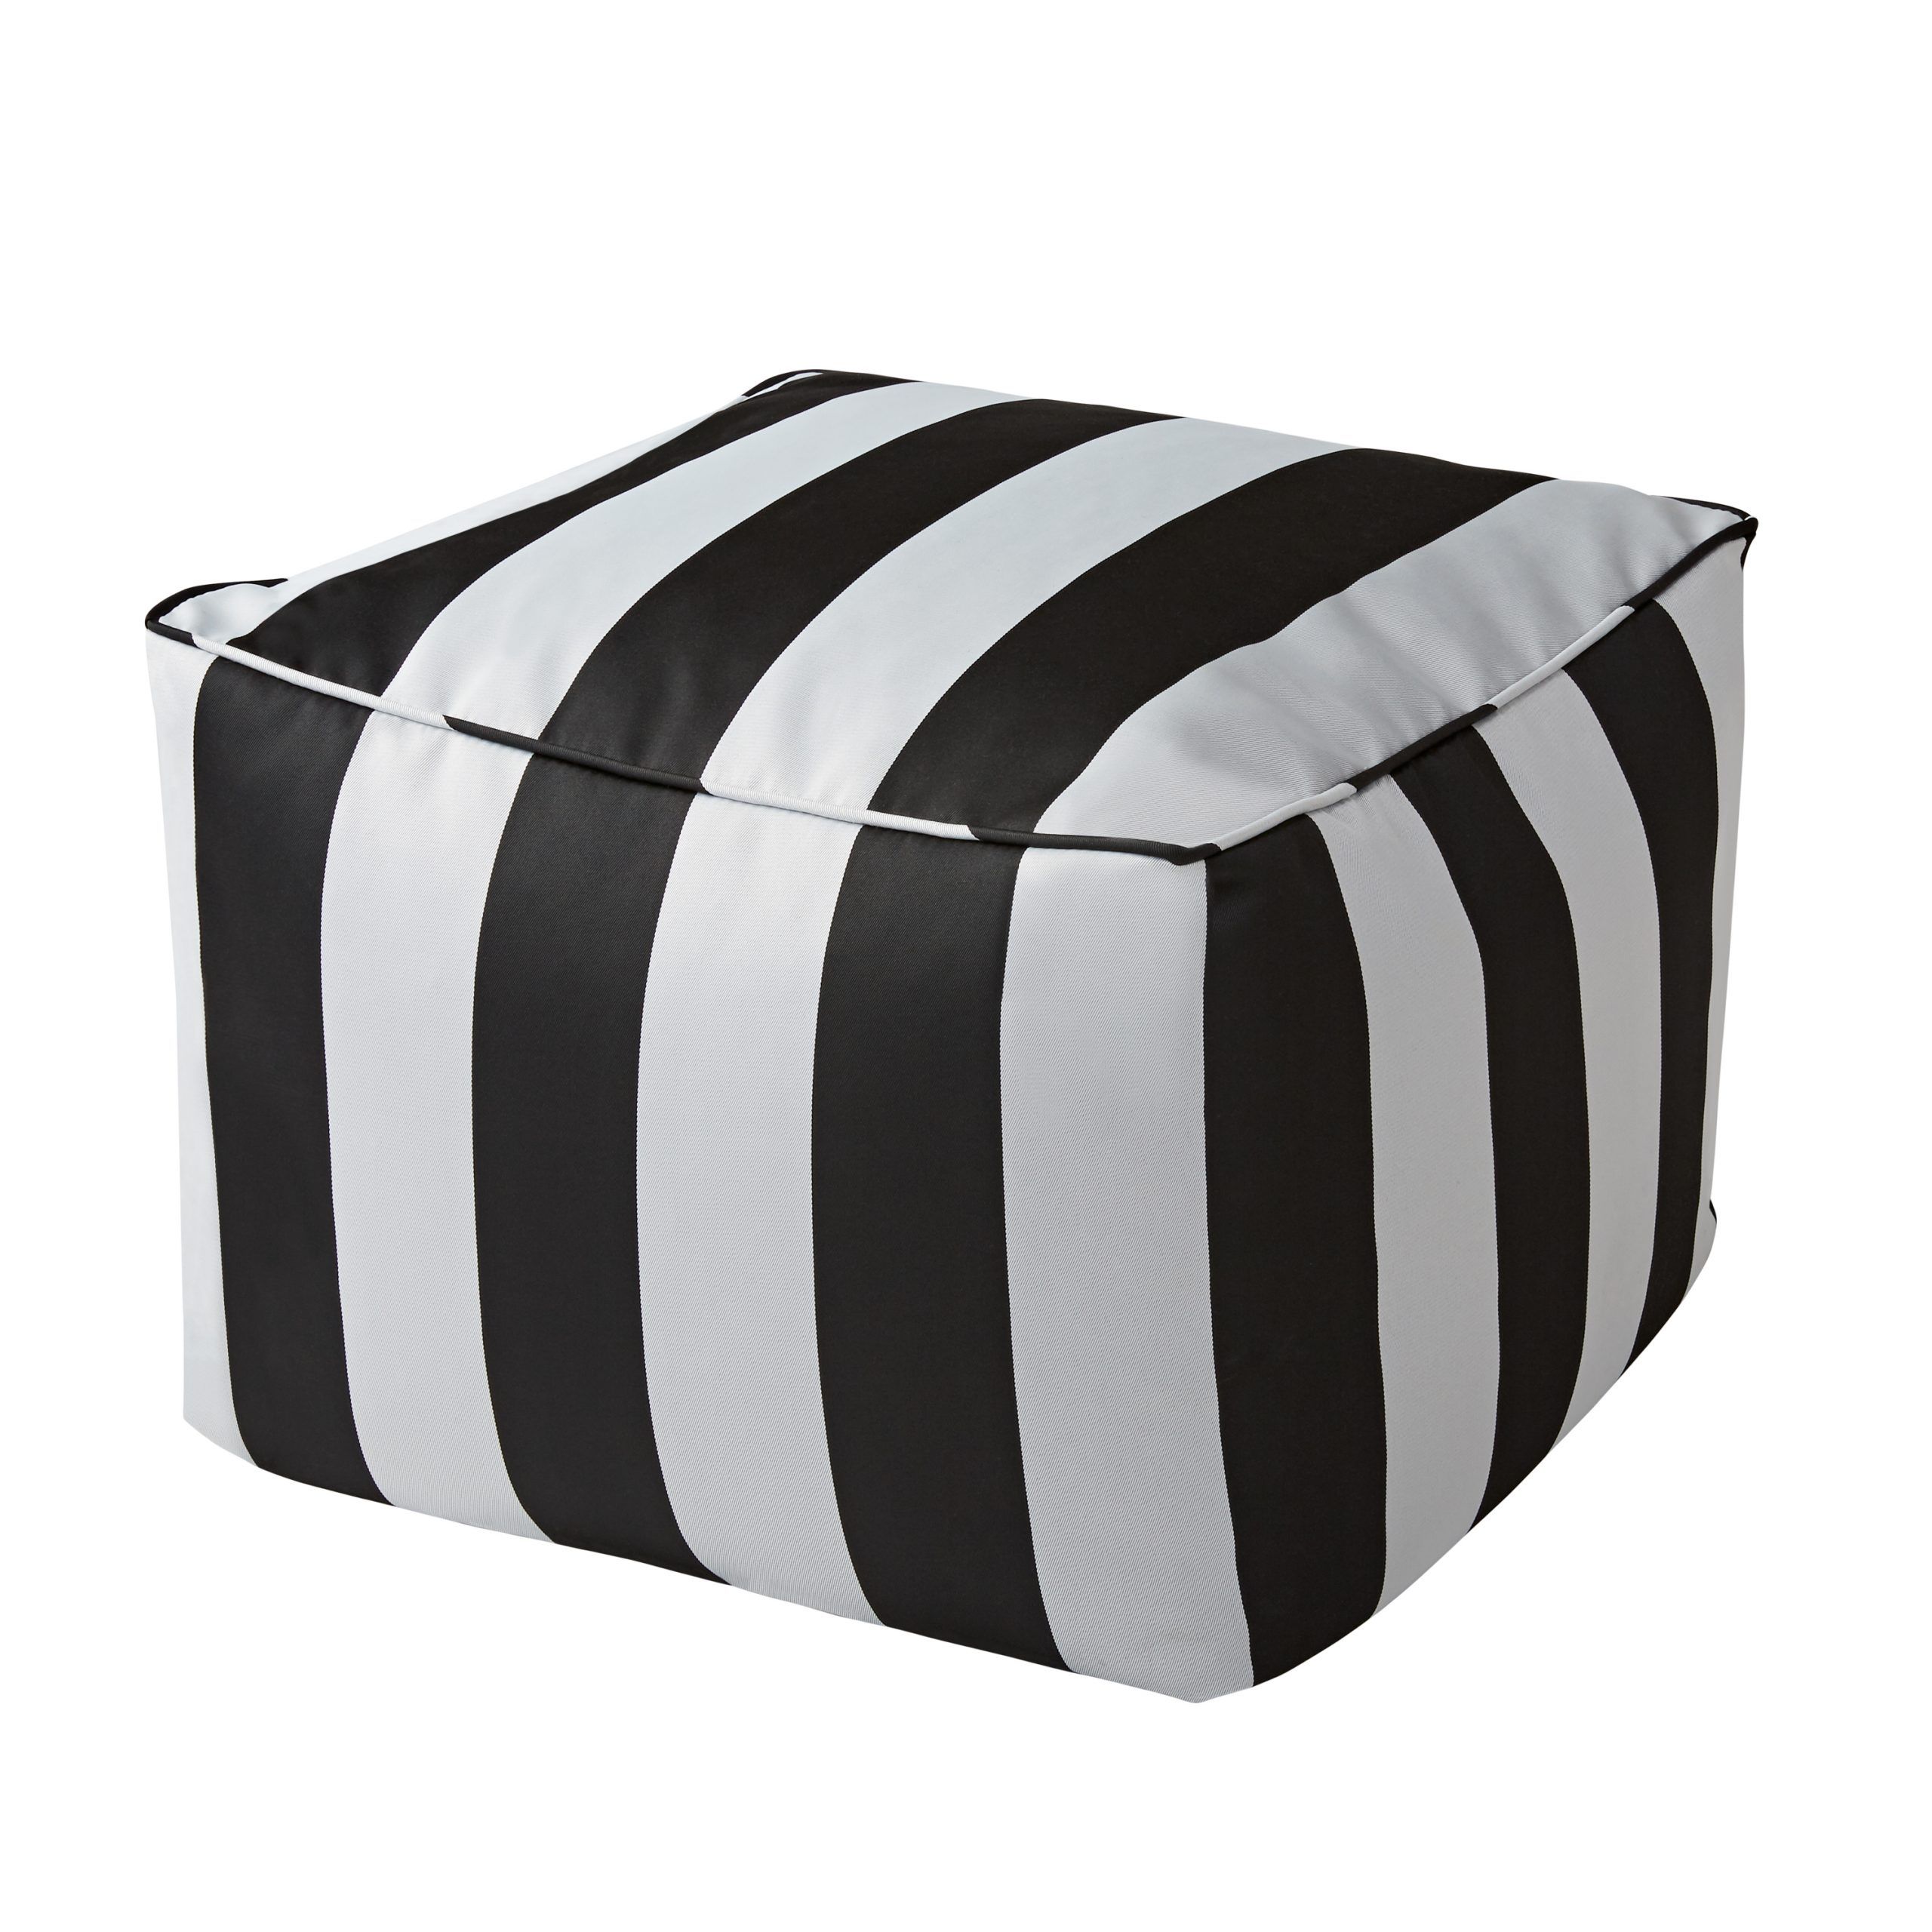 Better Homes & Gardens Dream Bean Patio Bean Bag Ottoman, Black And Inside Black And White Zigzag Pouf Ottomans (View 5 of 20)